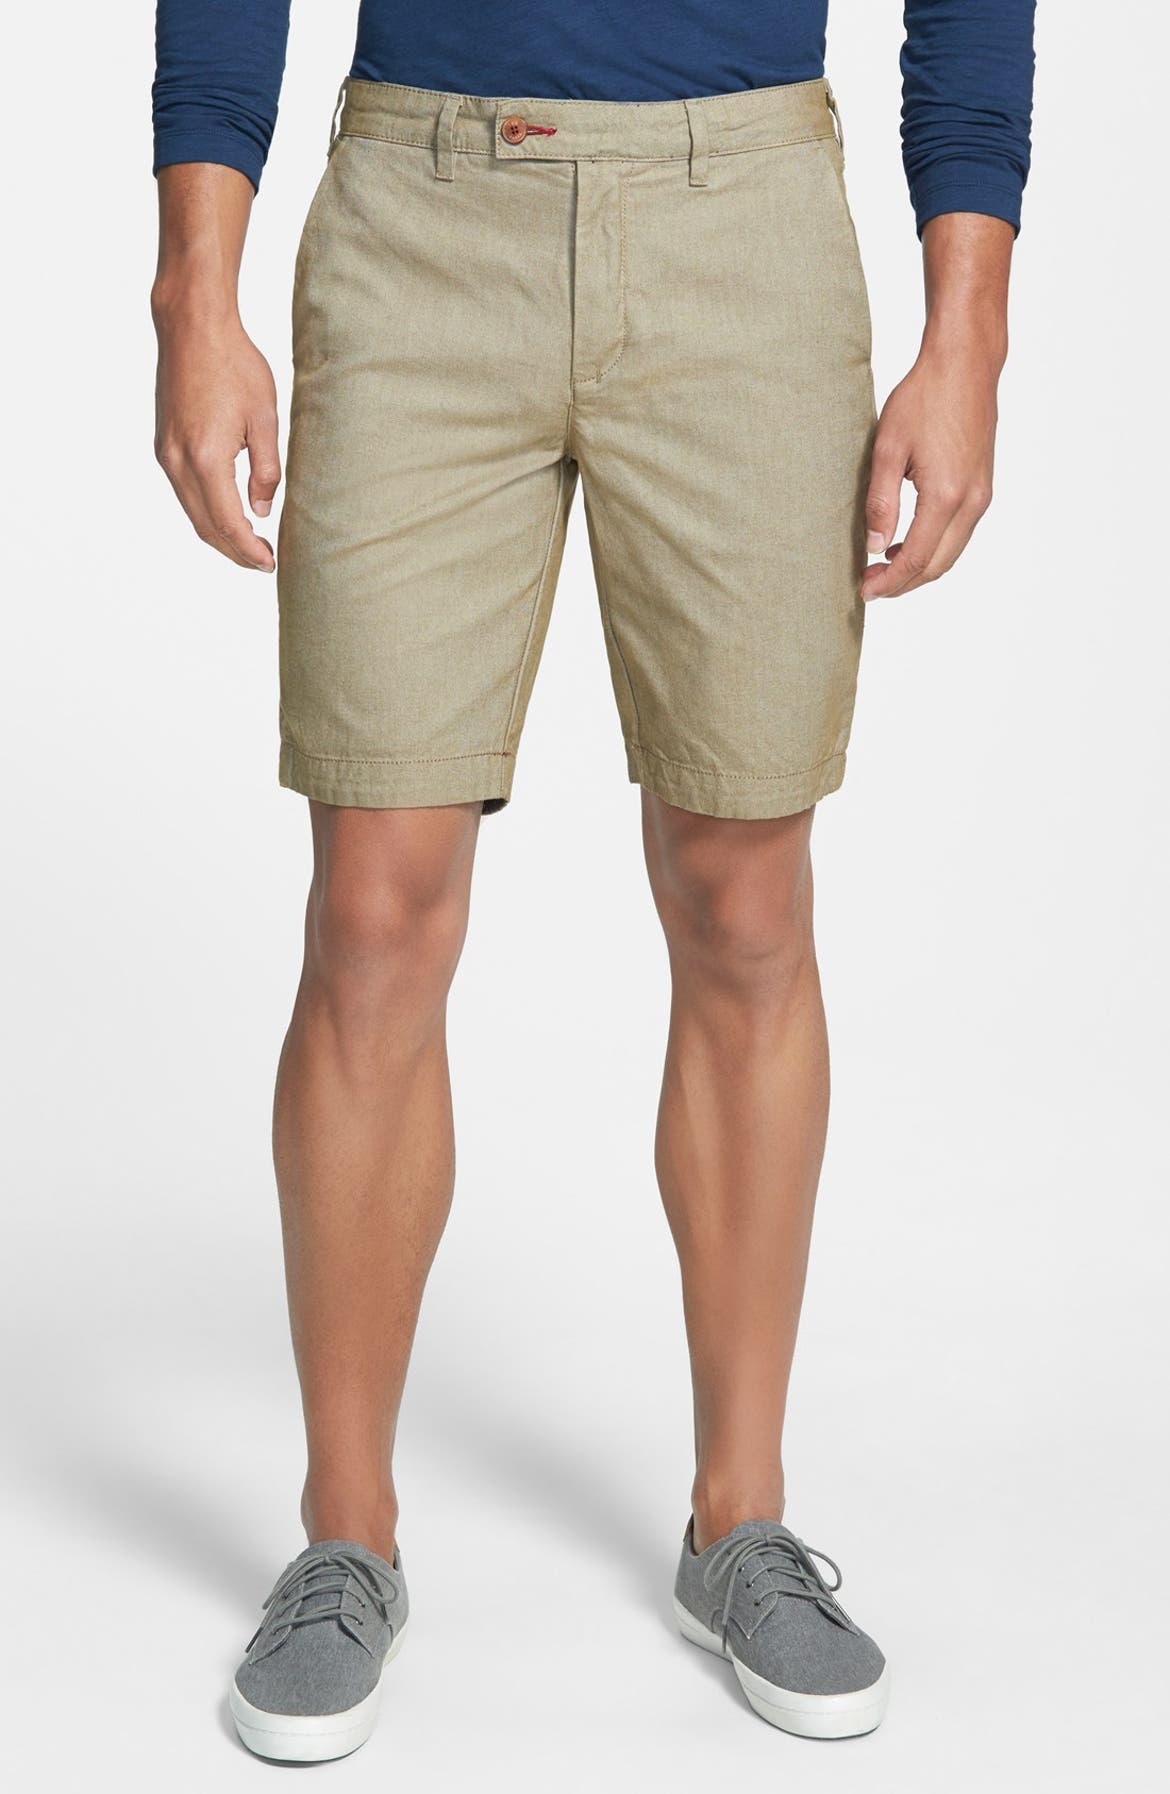 Ted Baker London Twill Shorts | Nordstrom